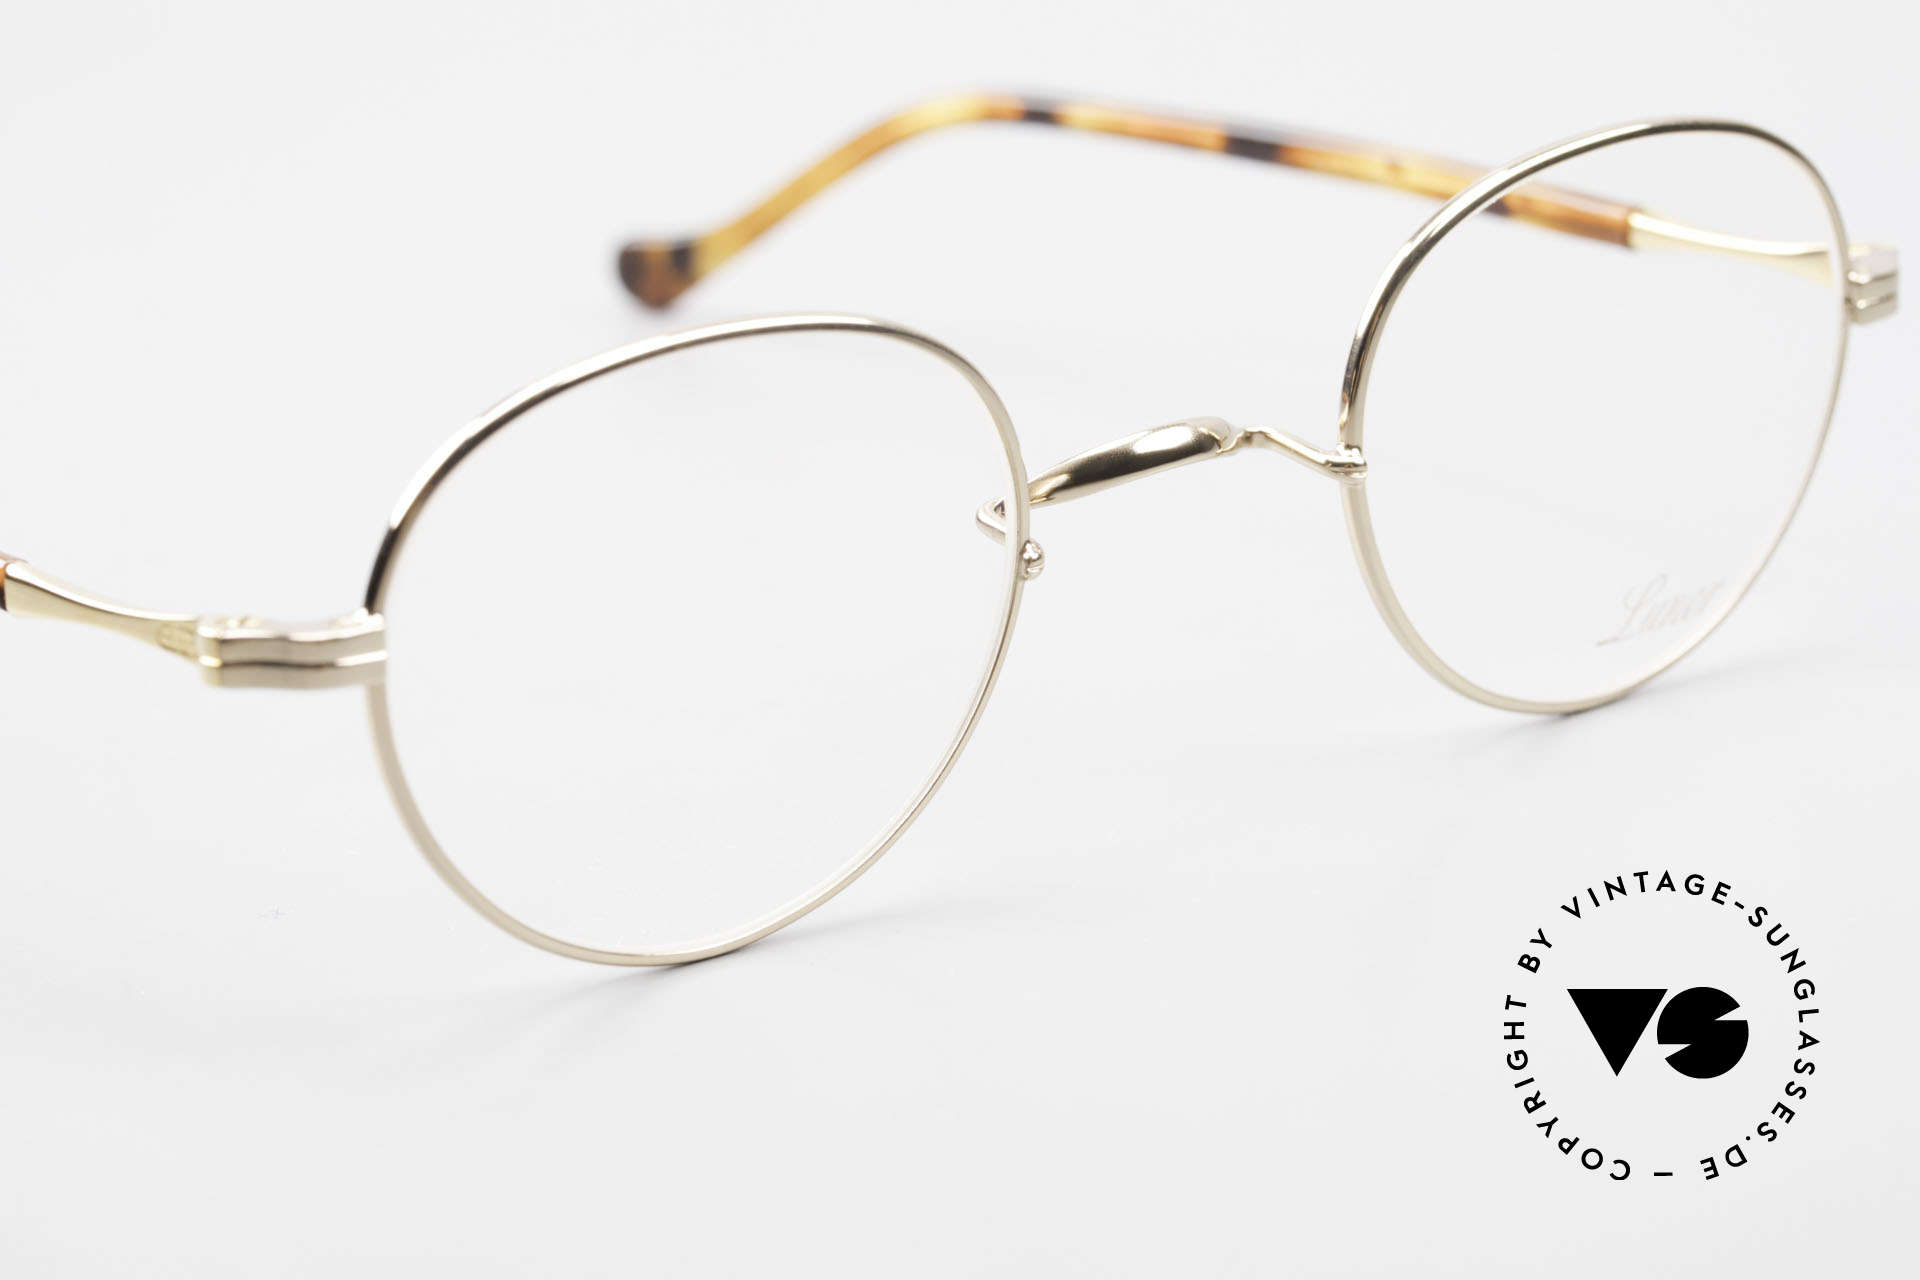 Lunor II A 22 Round Lunor Specs Gold Plated, unworn RARITY (for all lovers of quality) from app. 2010, Made for Men and Women